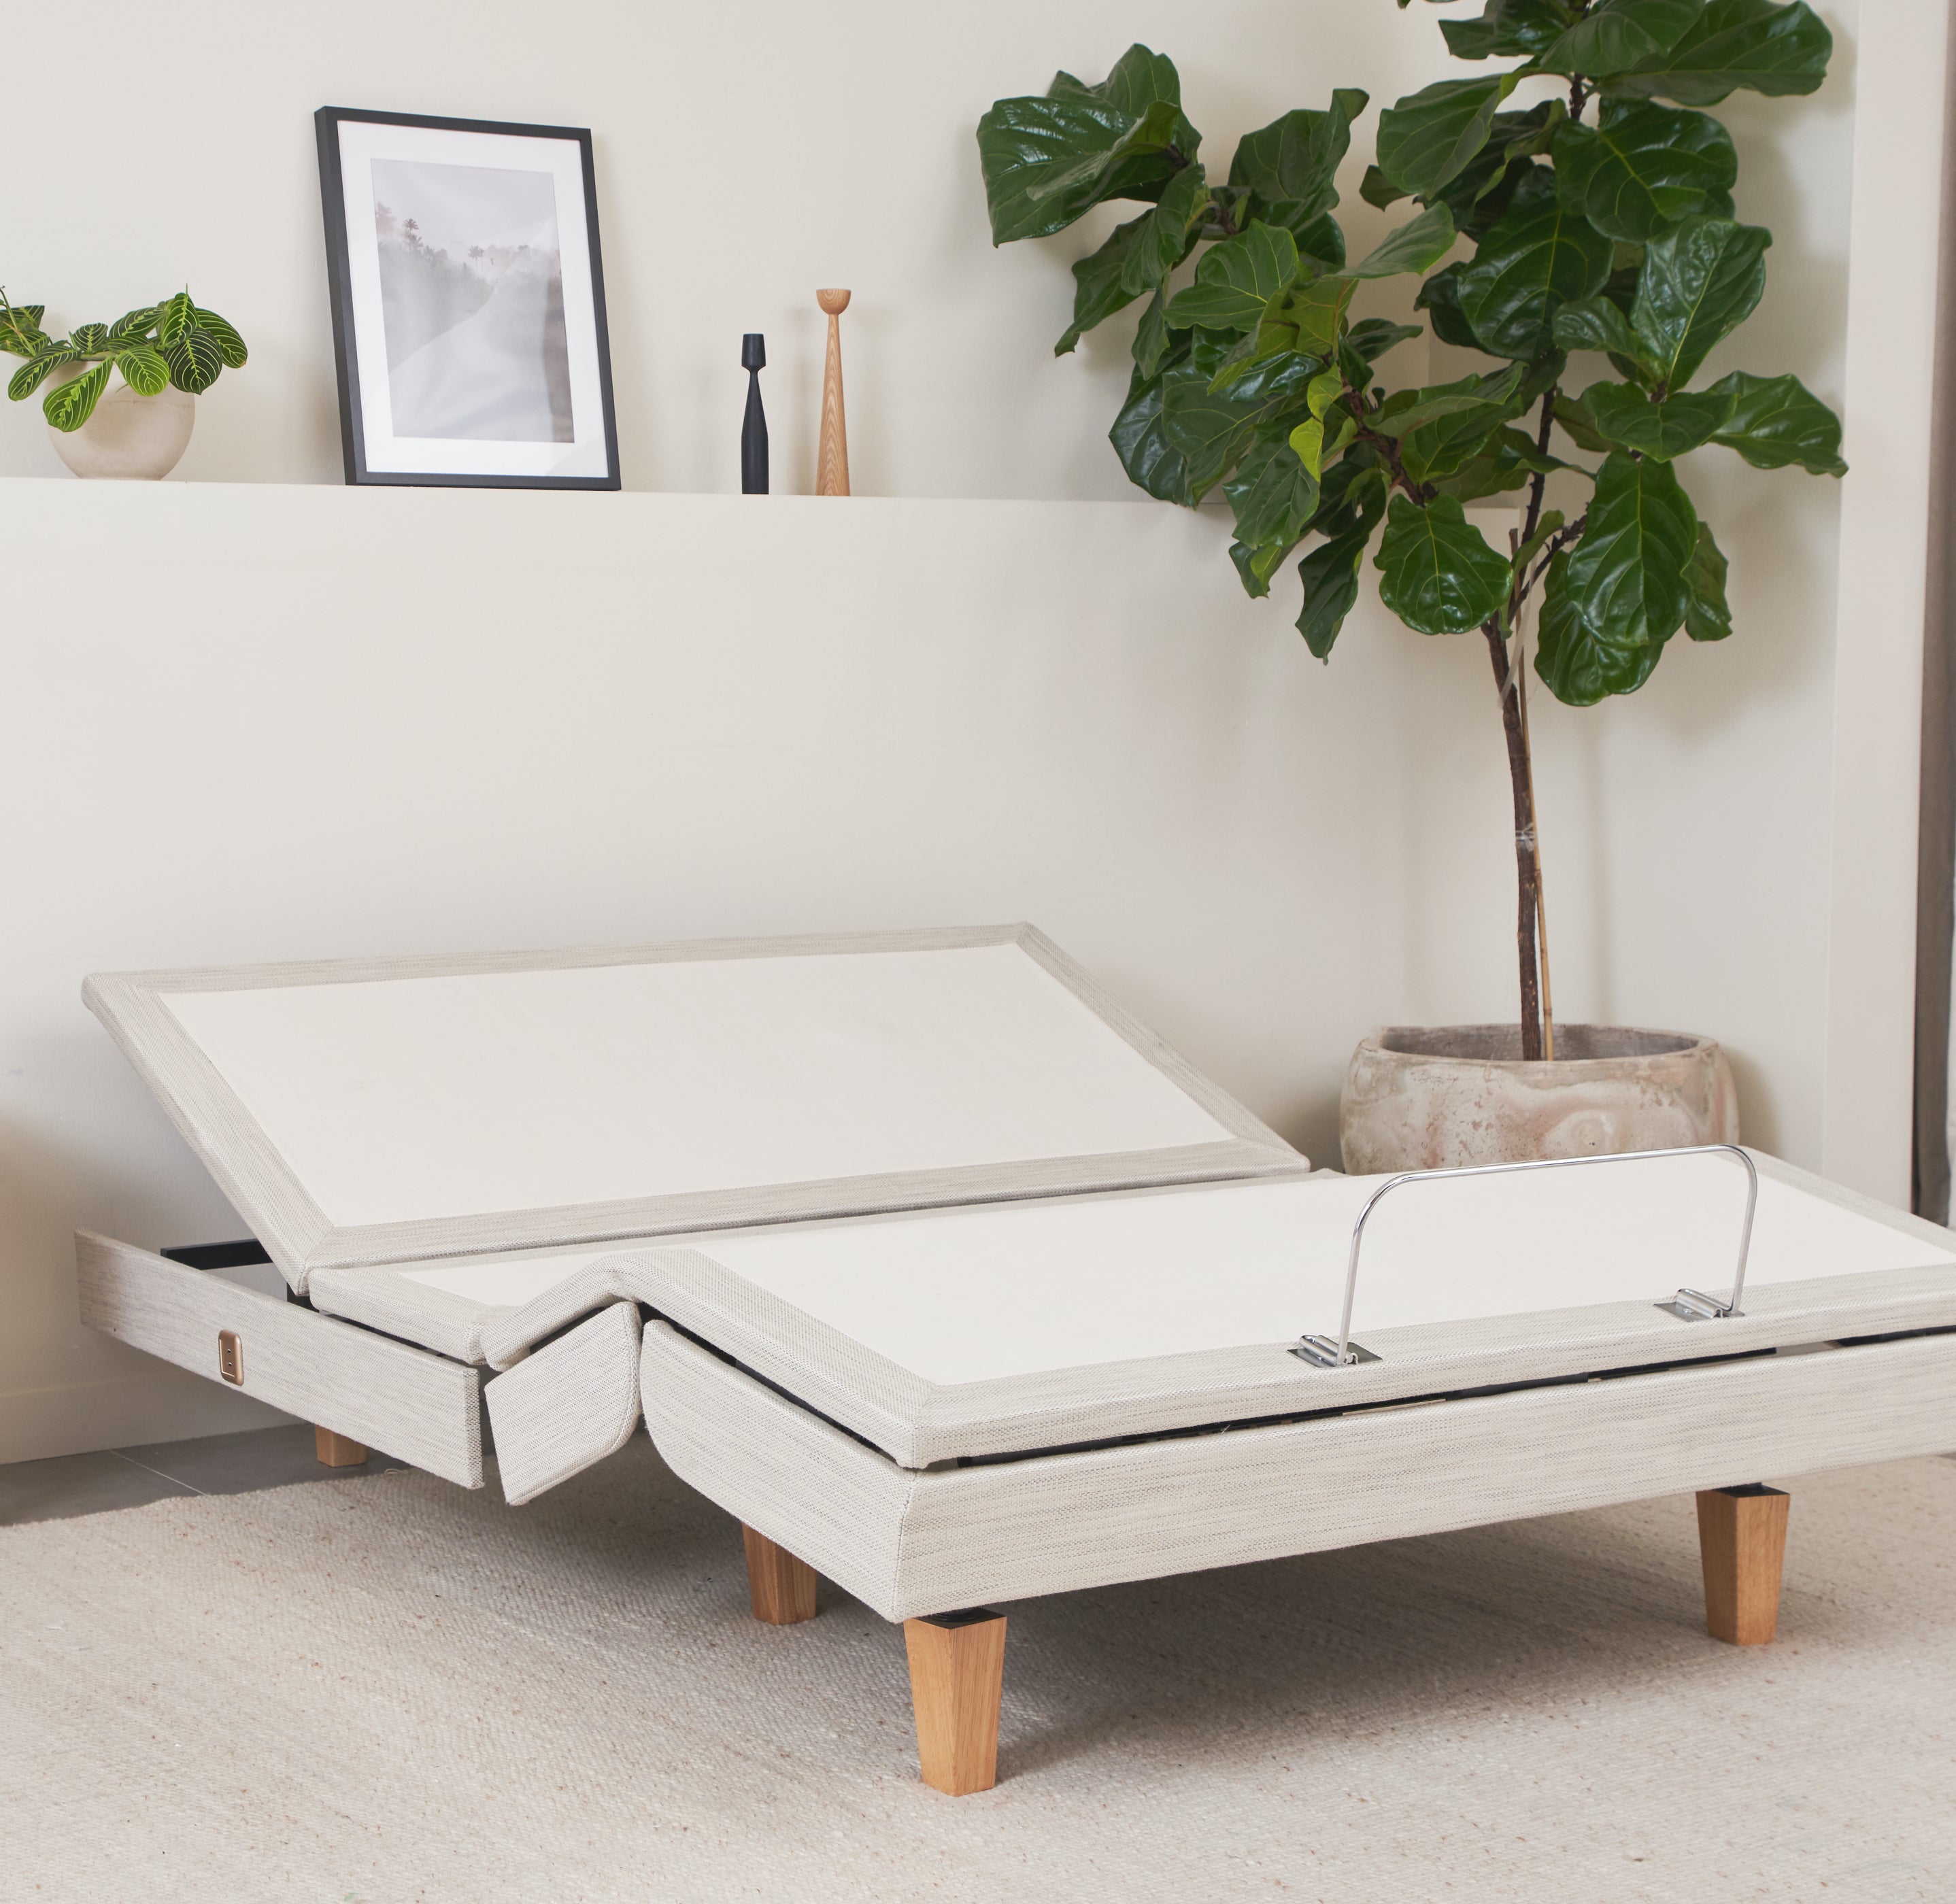 Ready to Upgrade Your Sleep With an Adjustable Bed Base?